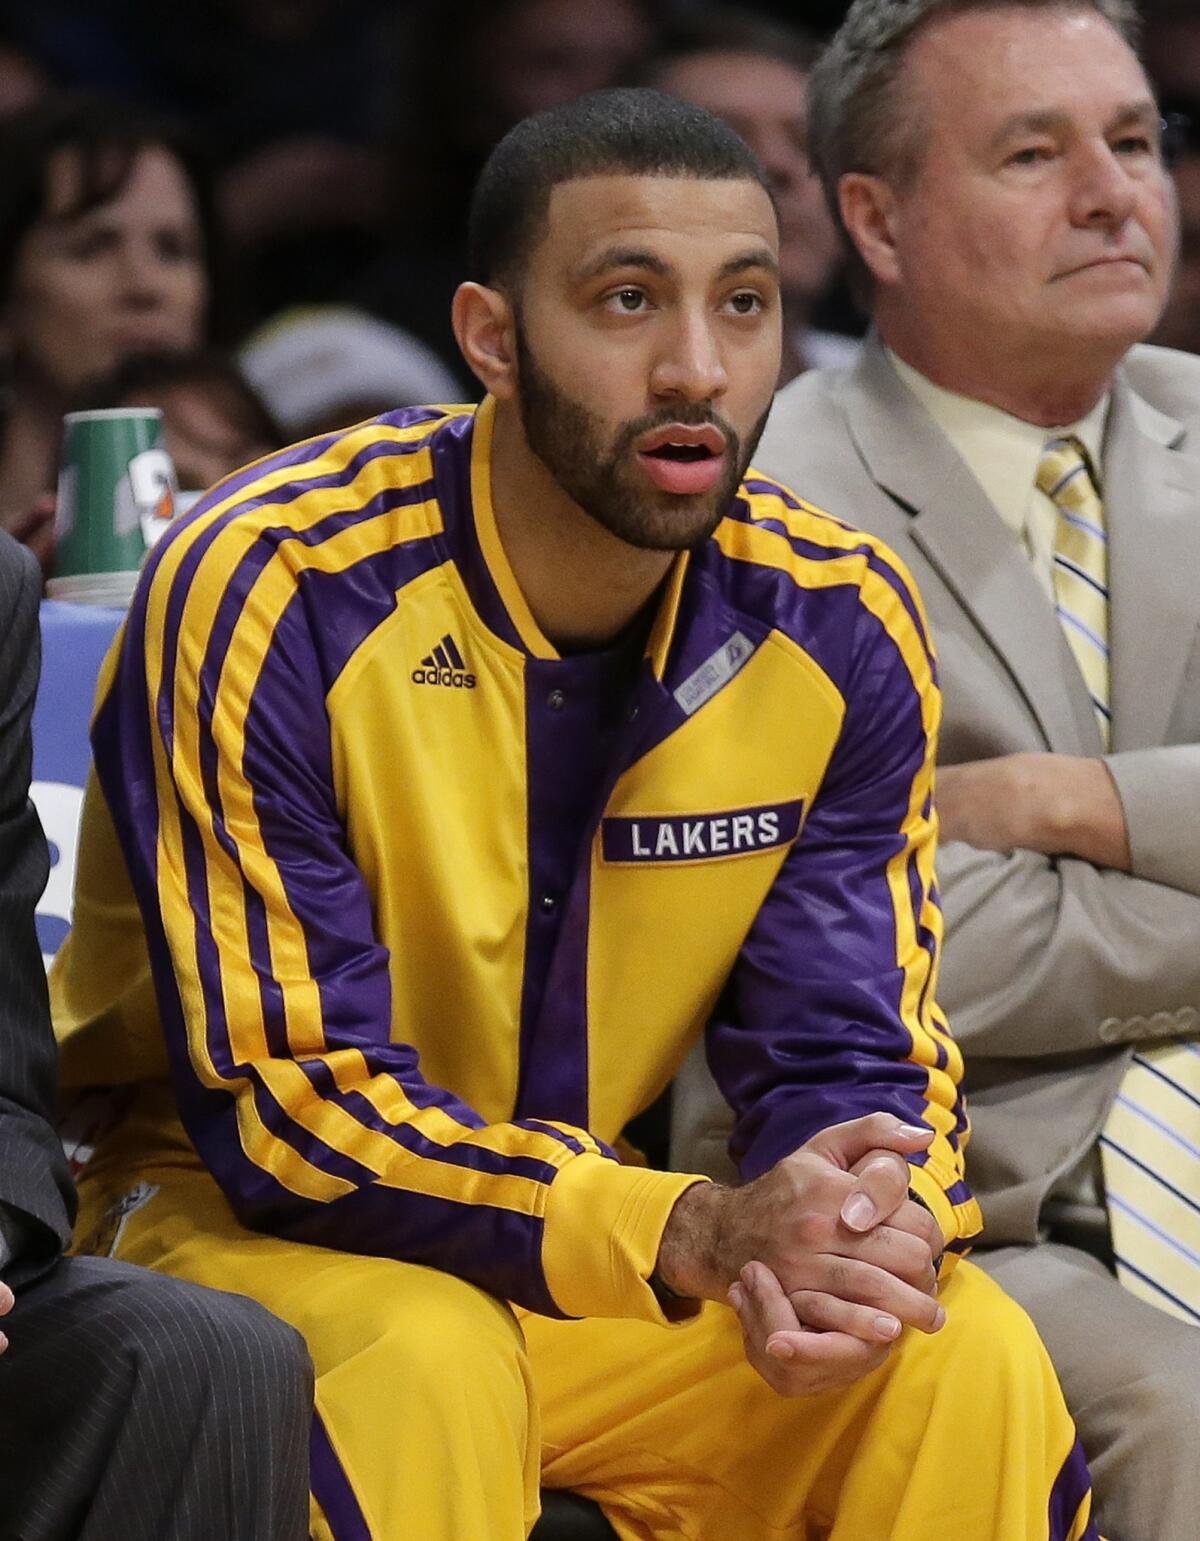 Newly acquired Lakers point guard Kendall Marshall watches from the bench during Friday's 104-91 win over the Minnesota Timberwolves.